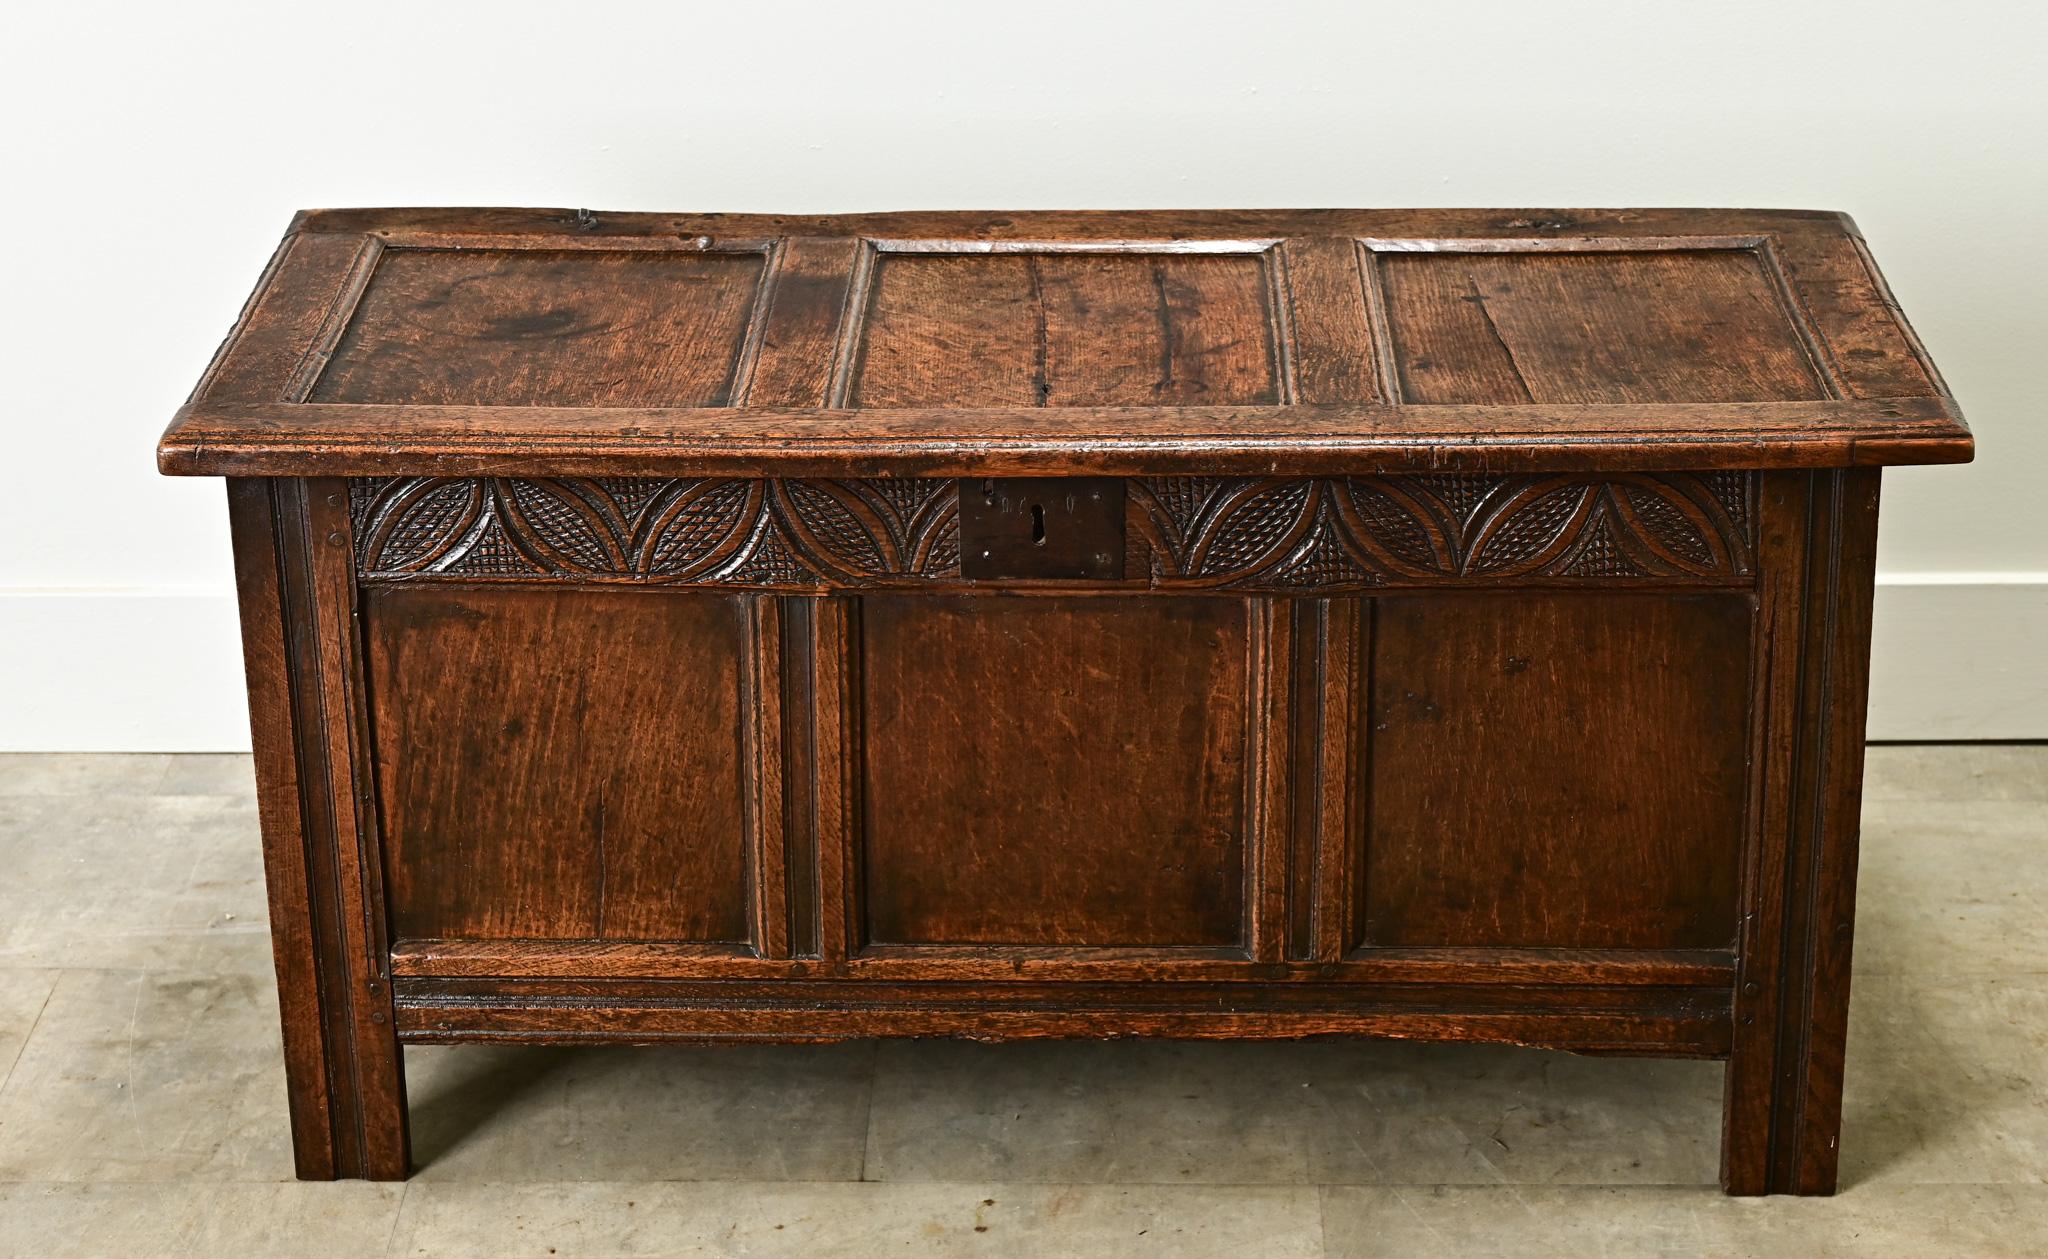 This Dutch solid oak paneled and carved coffer is from the 1800’s. The sturdy trunk opens on hand forged iron hinges to a wide open interior with a candle box in the top right. Cleaned and polished with a paste wax, this antique is ready for your